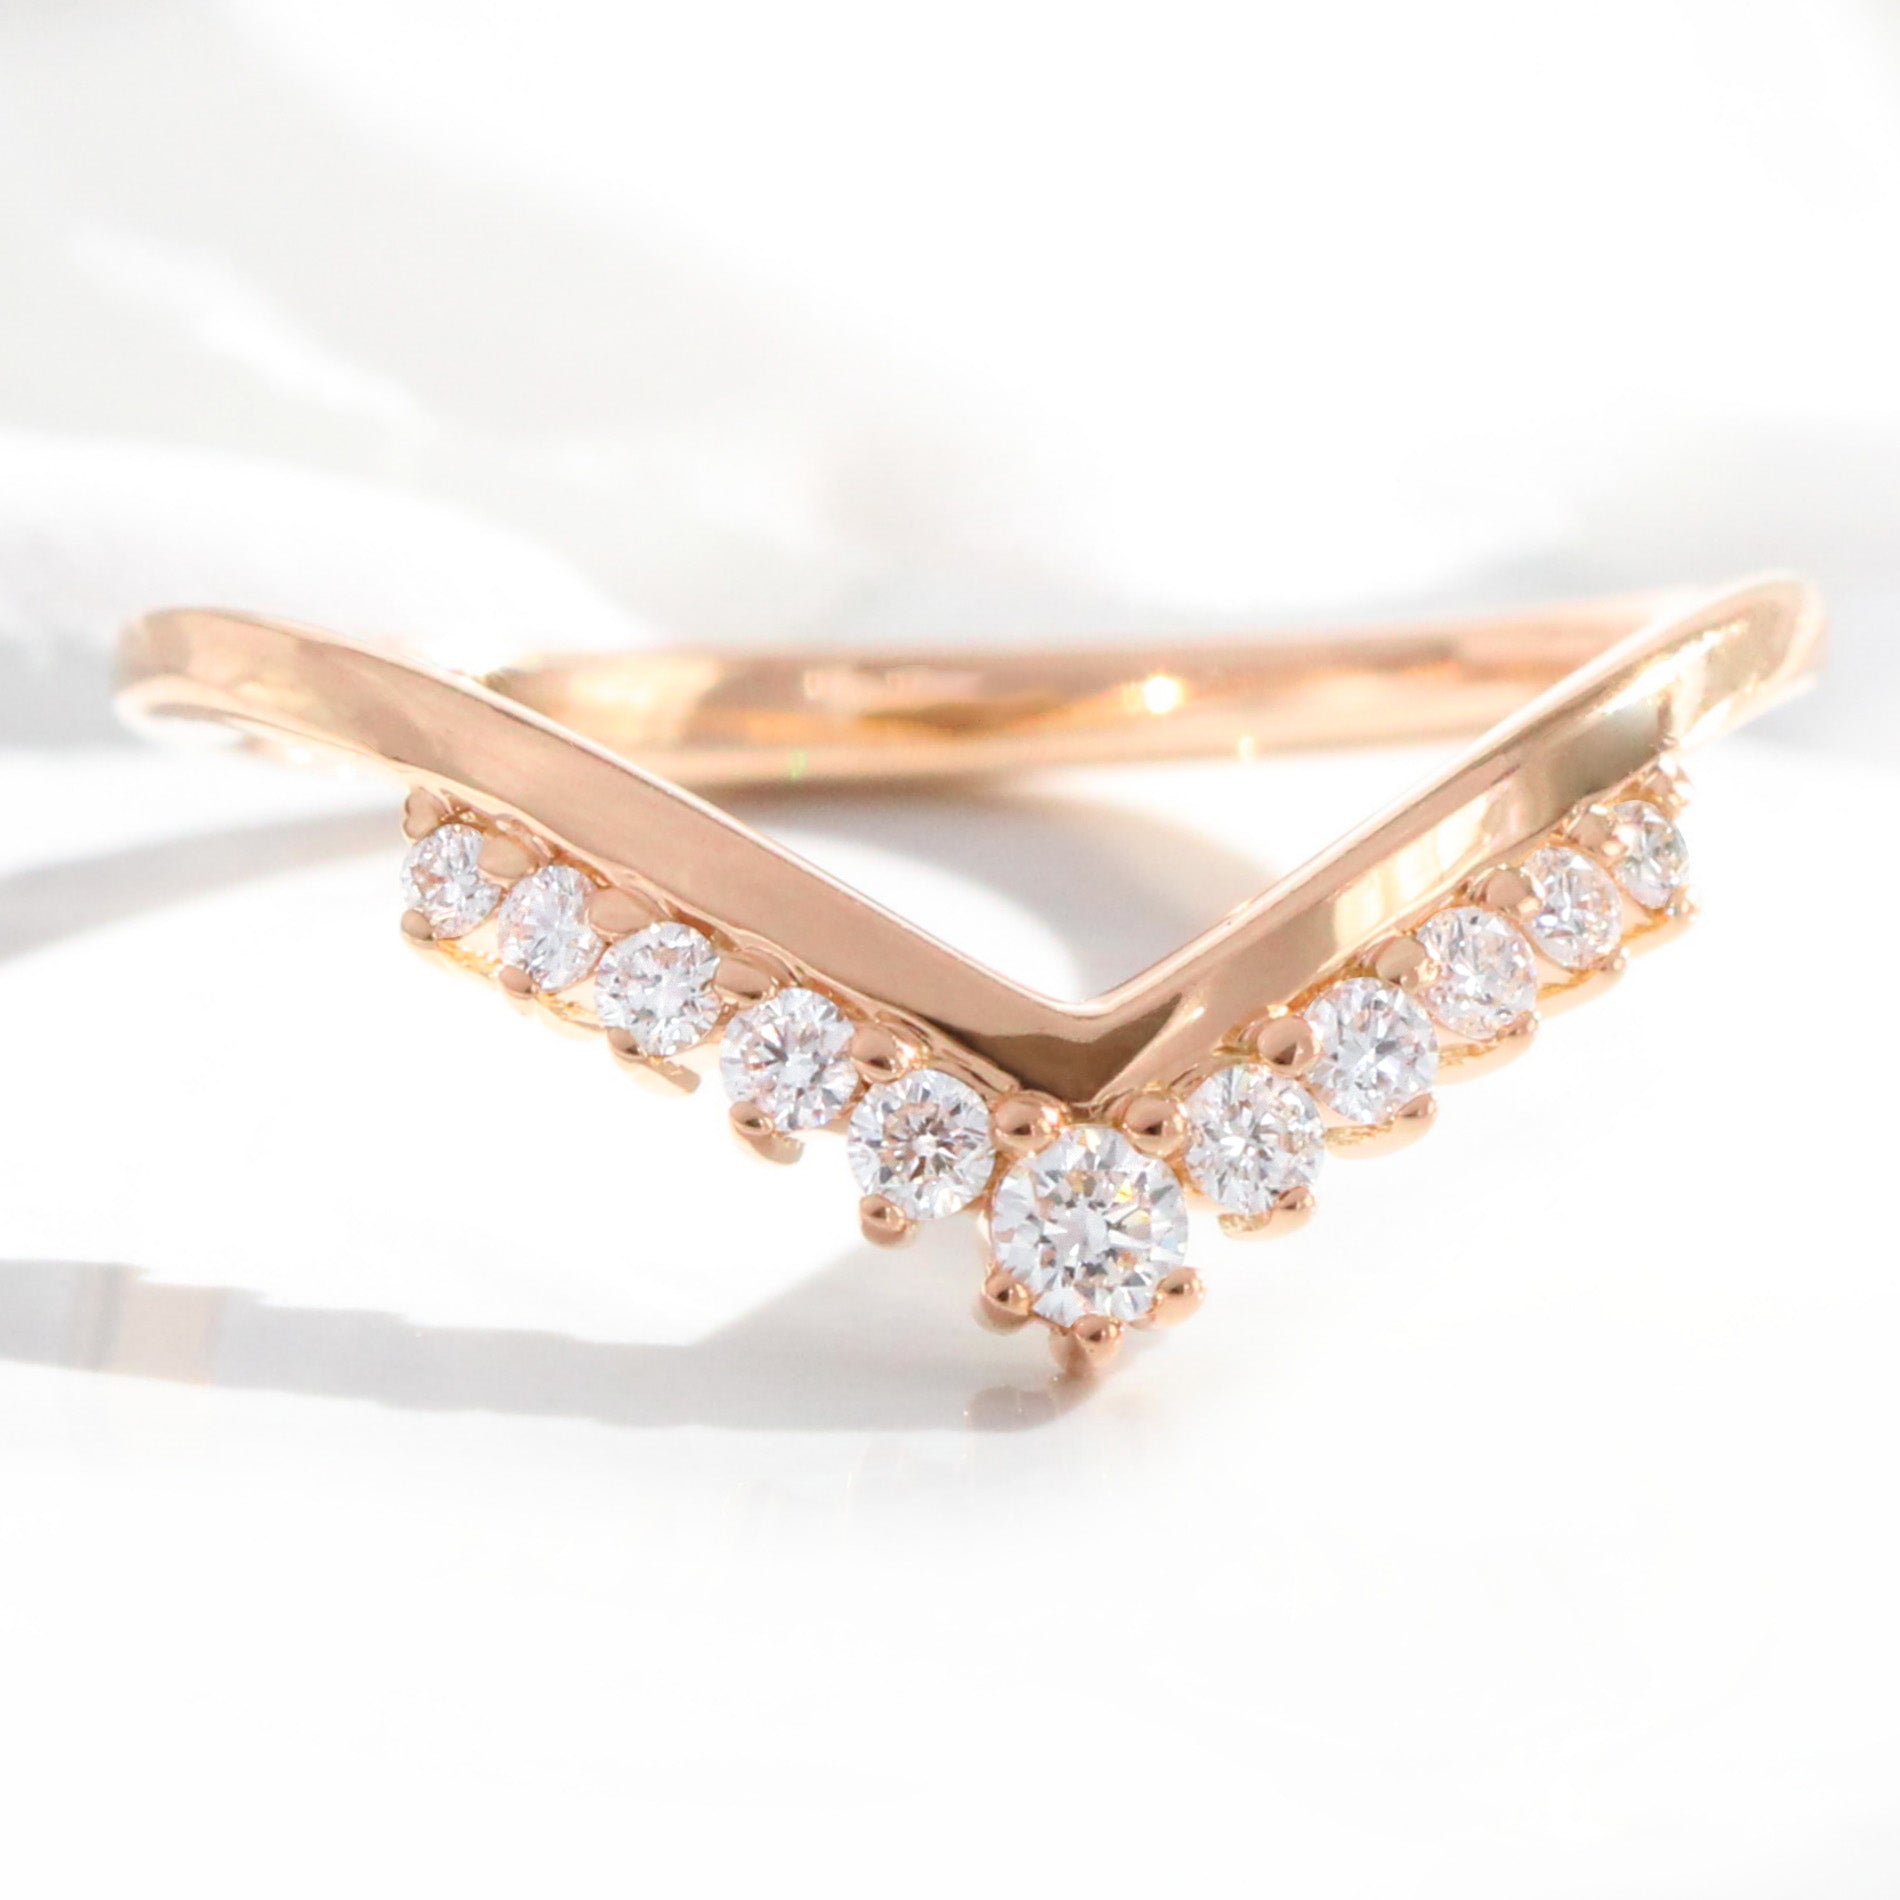 Tiara diamond wedding ring rose gold curved V shaped band by la more design jewelry